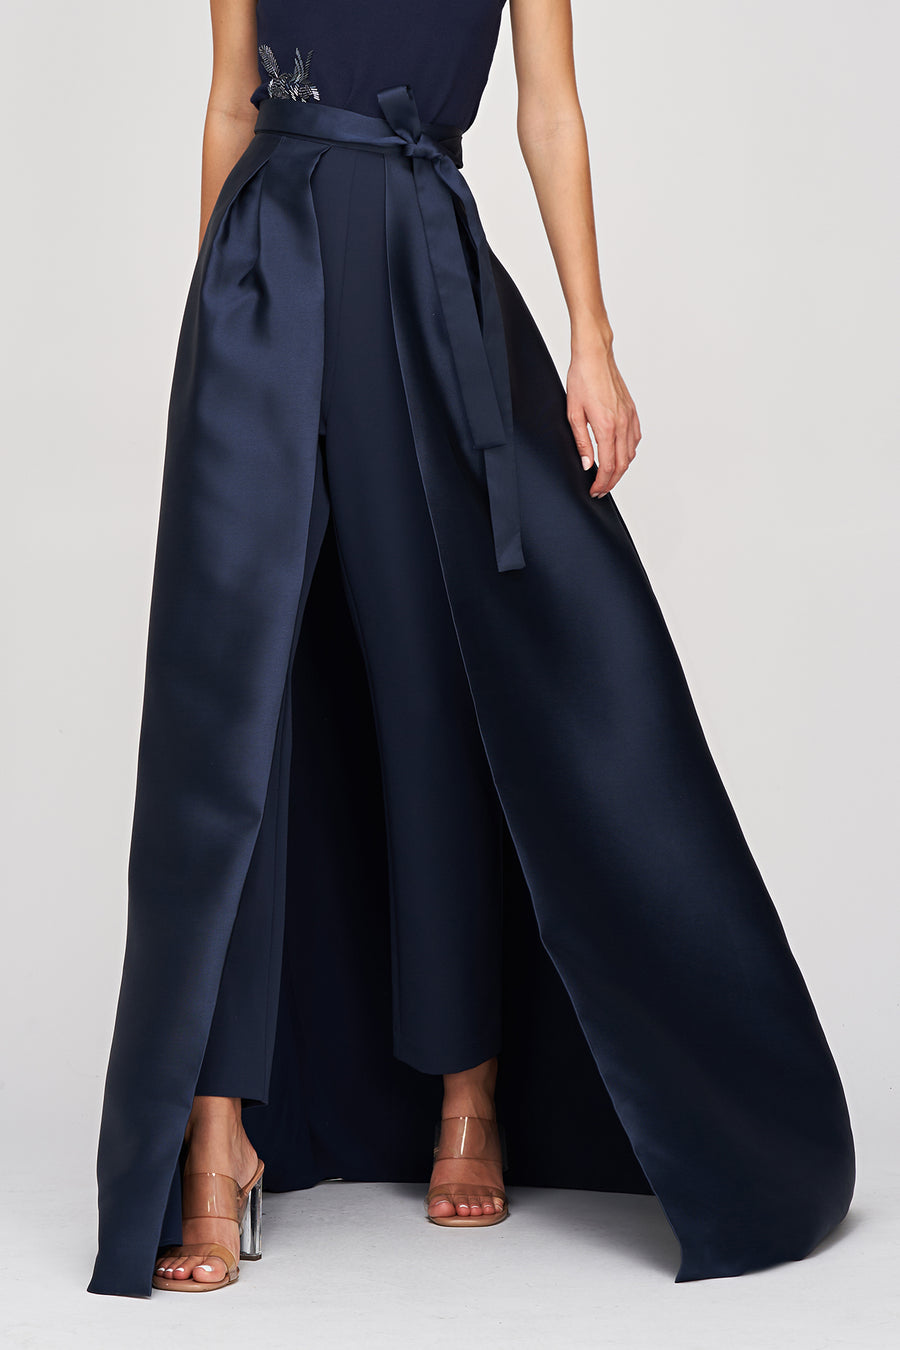 Buy OneTwoTG Women's Overlay Pants Split Dress Pants Maxi Skirt Attached  Pants 4 L at Amazon.in